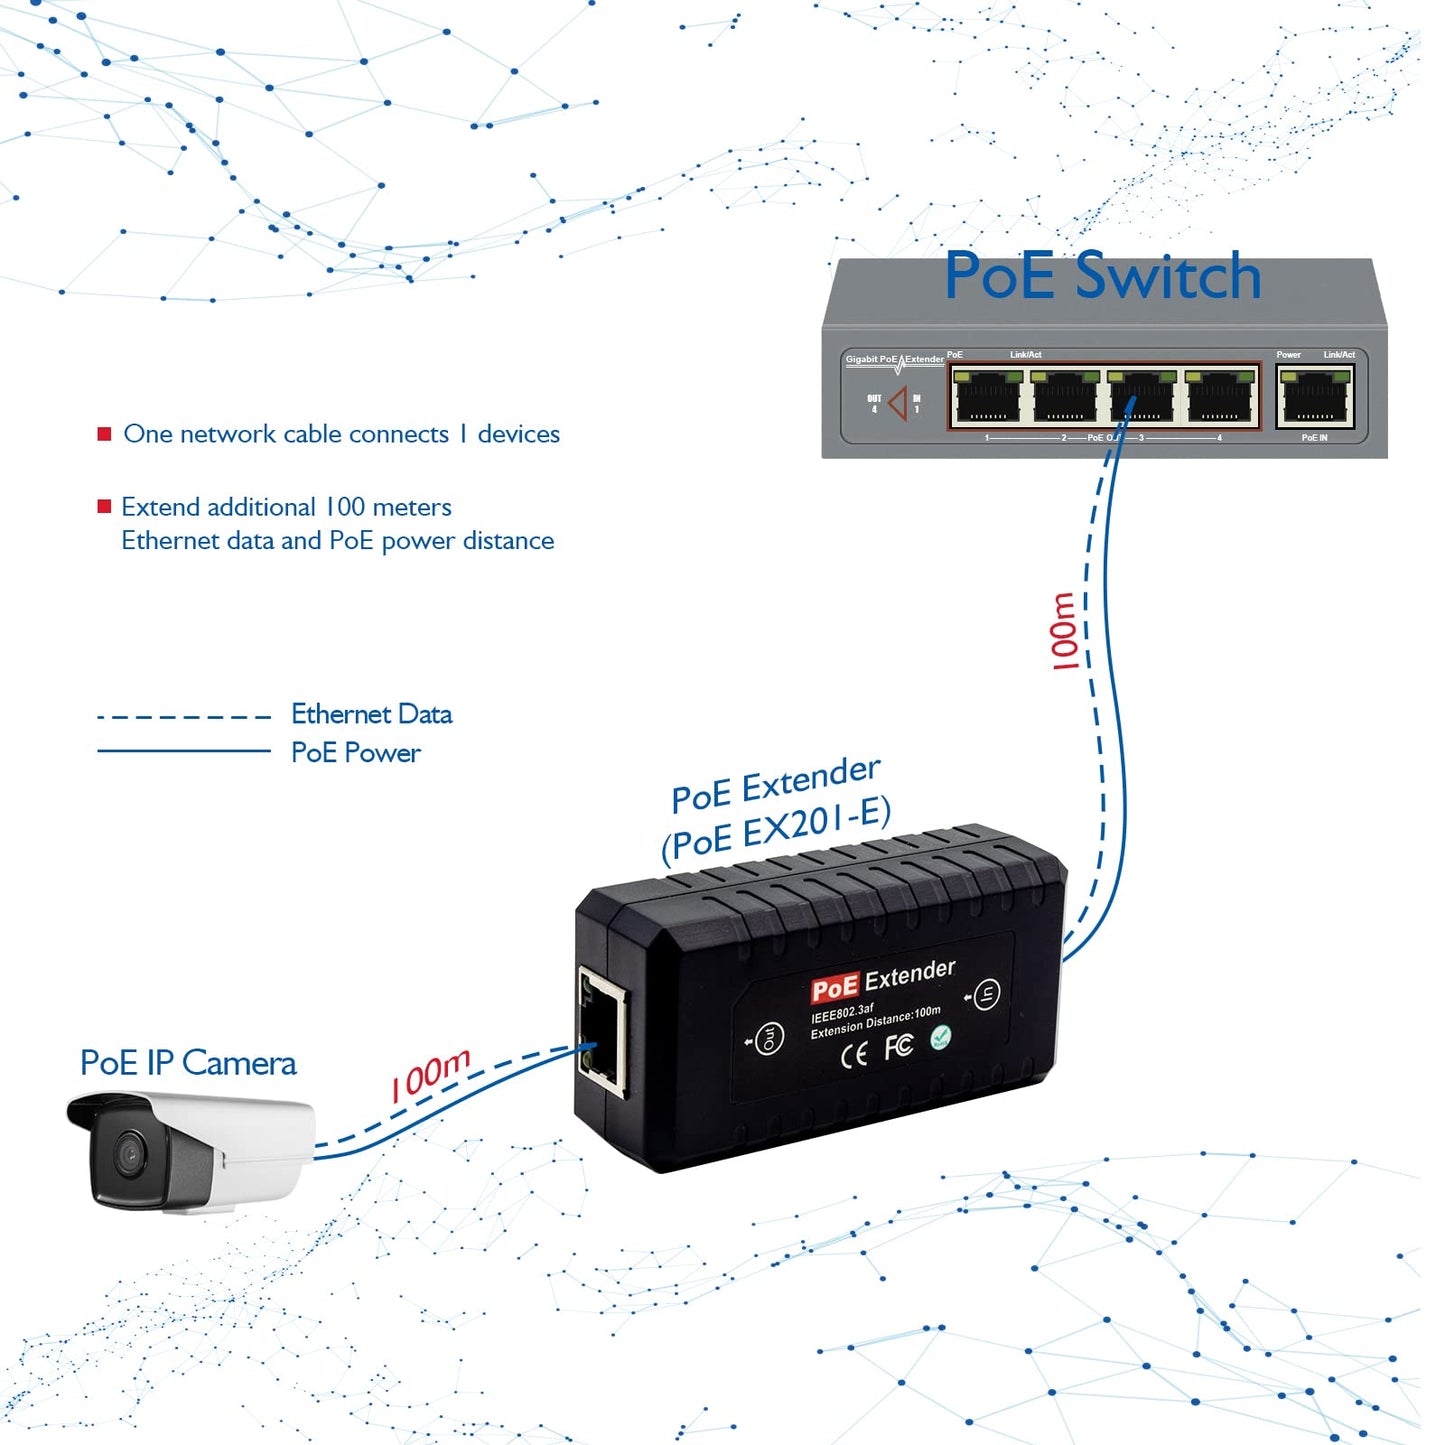 PoE Extender Repeater,1 Port Supported，10/100Mbps，15W Comply with IEEE 802.3af Power Over Ethernet for Security POE Camera Over Cat5/Cat6（ThePoEstore） - Opticdeals